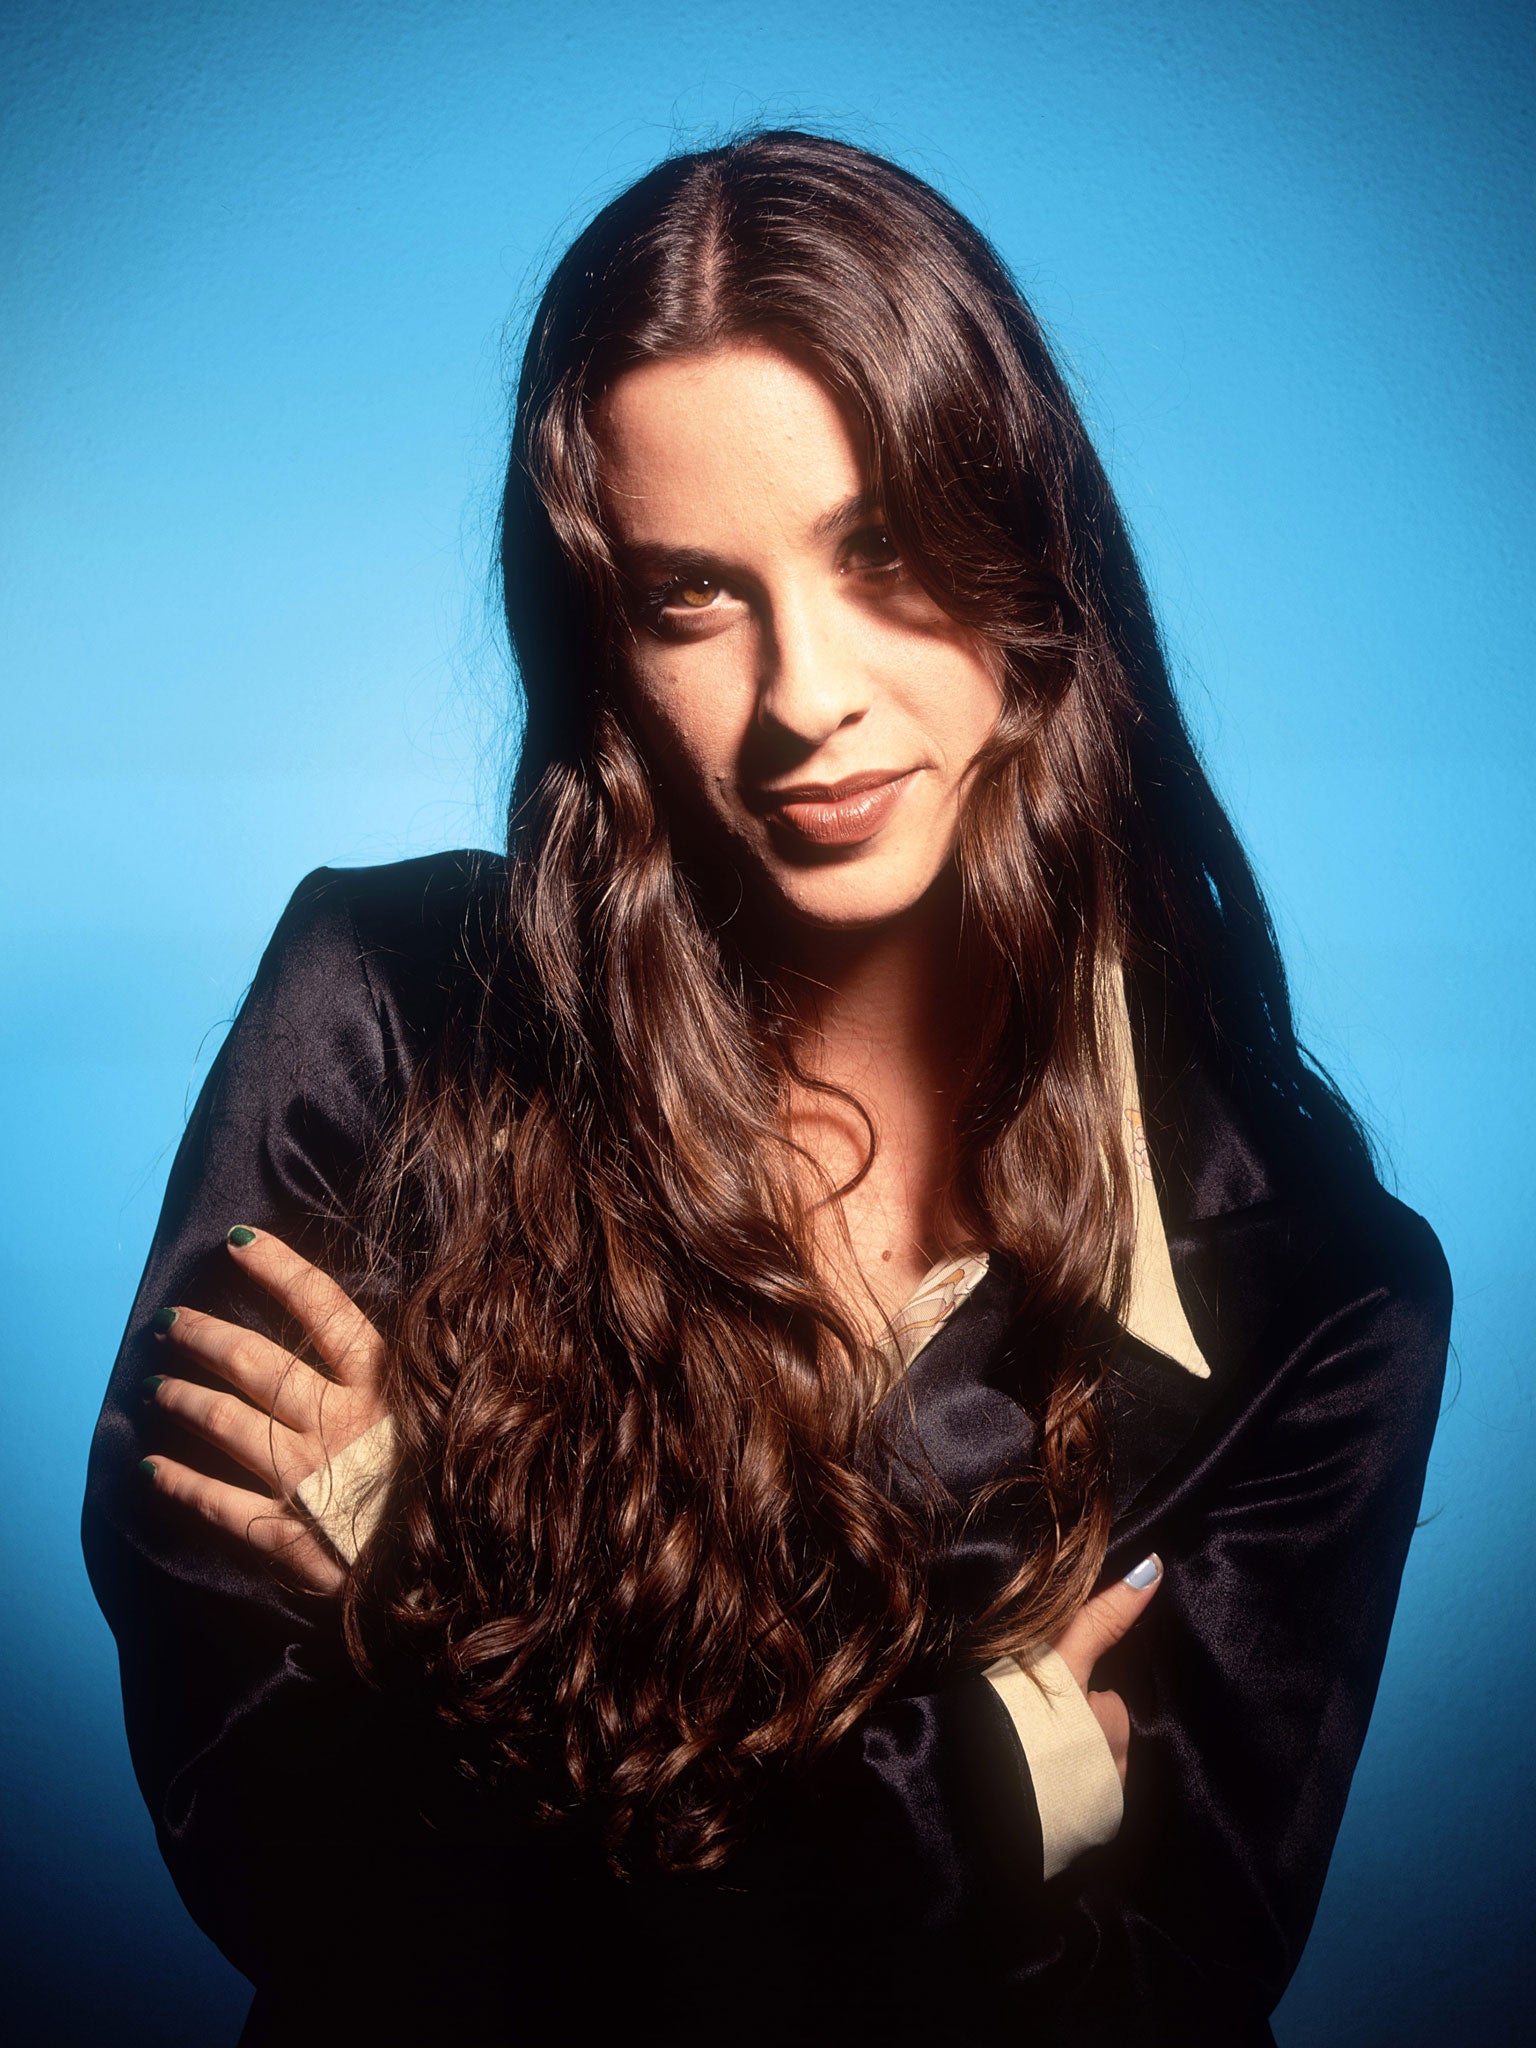 Blast from the past: Alanis Morissette's Jagged Little Pill was the best-selling album of 1996 (Rex)